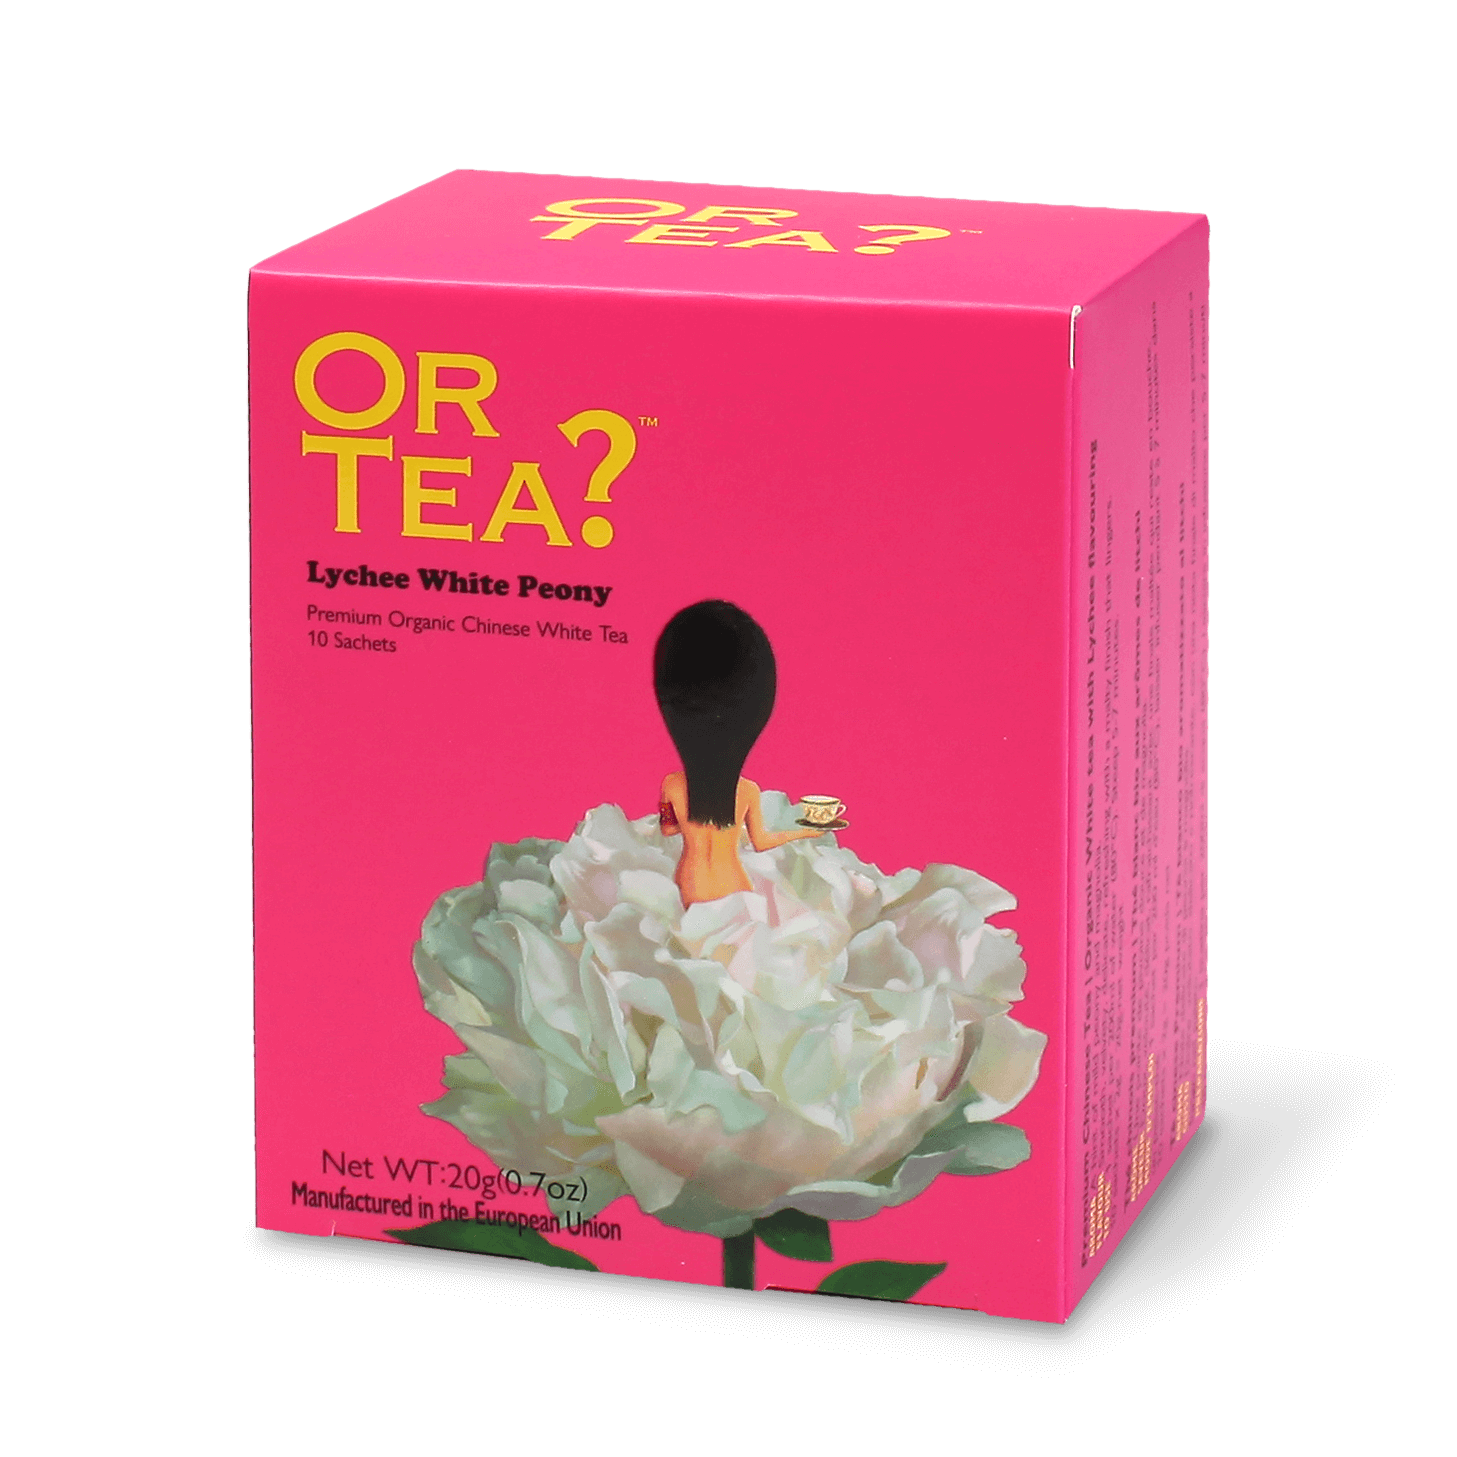 Or Tea 10 sachets in a box lychée white peony